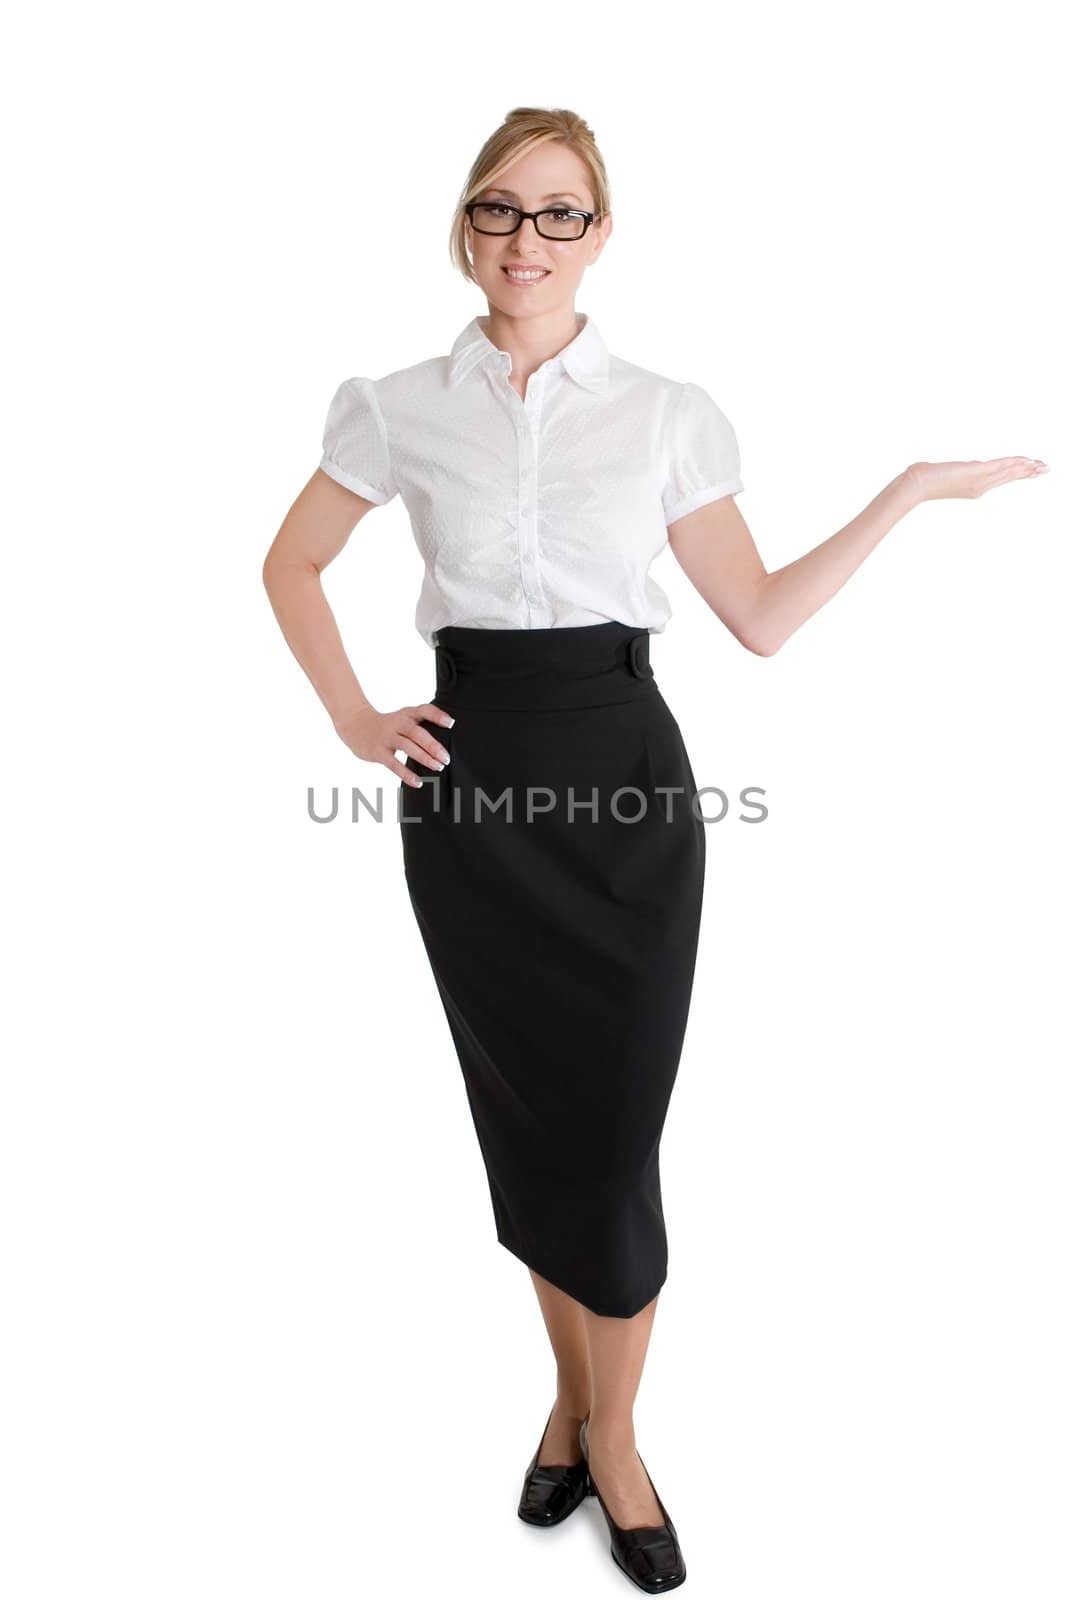 Businesswoman with hand outstretched demonstrating or showcasing a product.